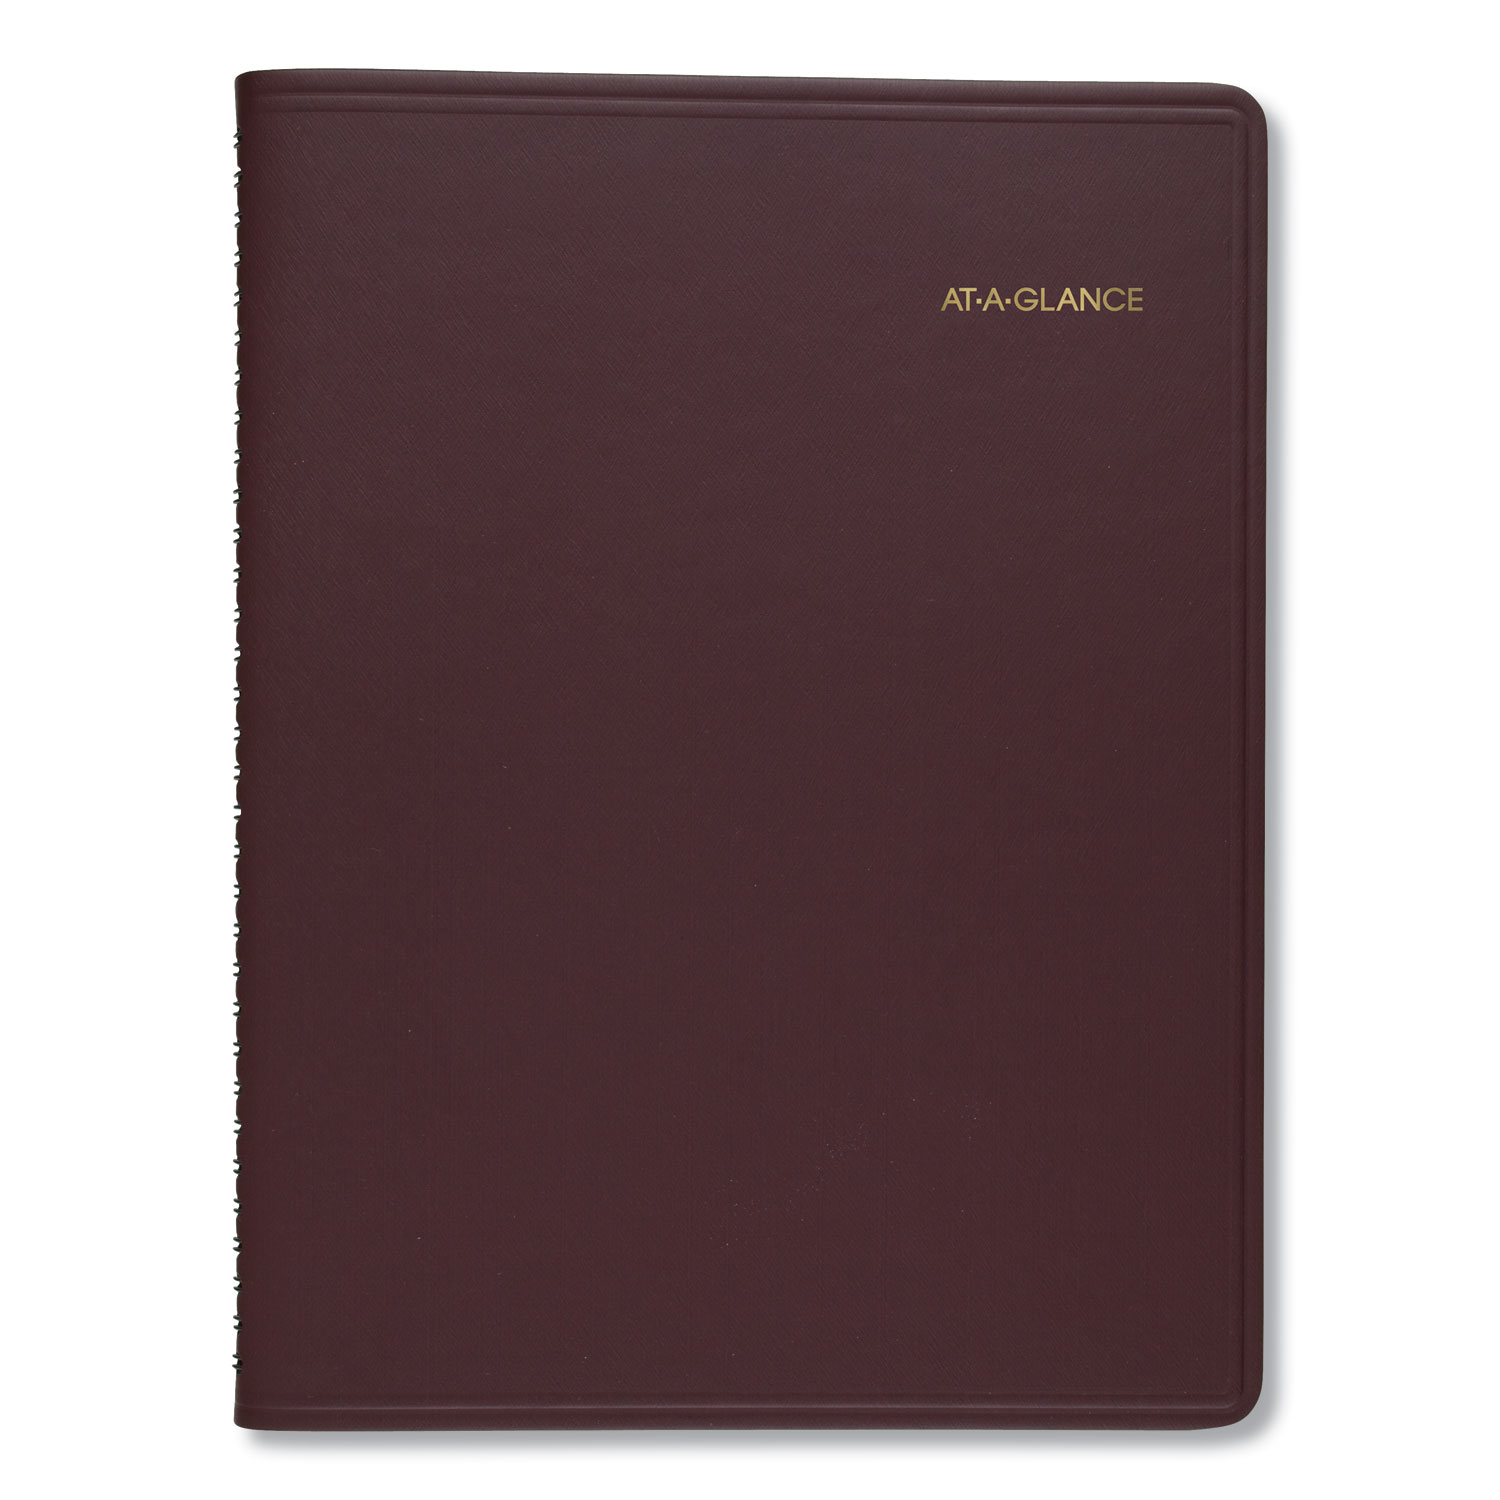  AT-A-GLANCE 7026050 Monthly Planner, 11 x 8 7/8, Winestone, 2020-2021 (AAG7026050) 